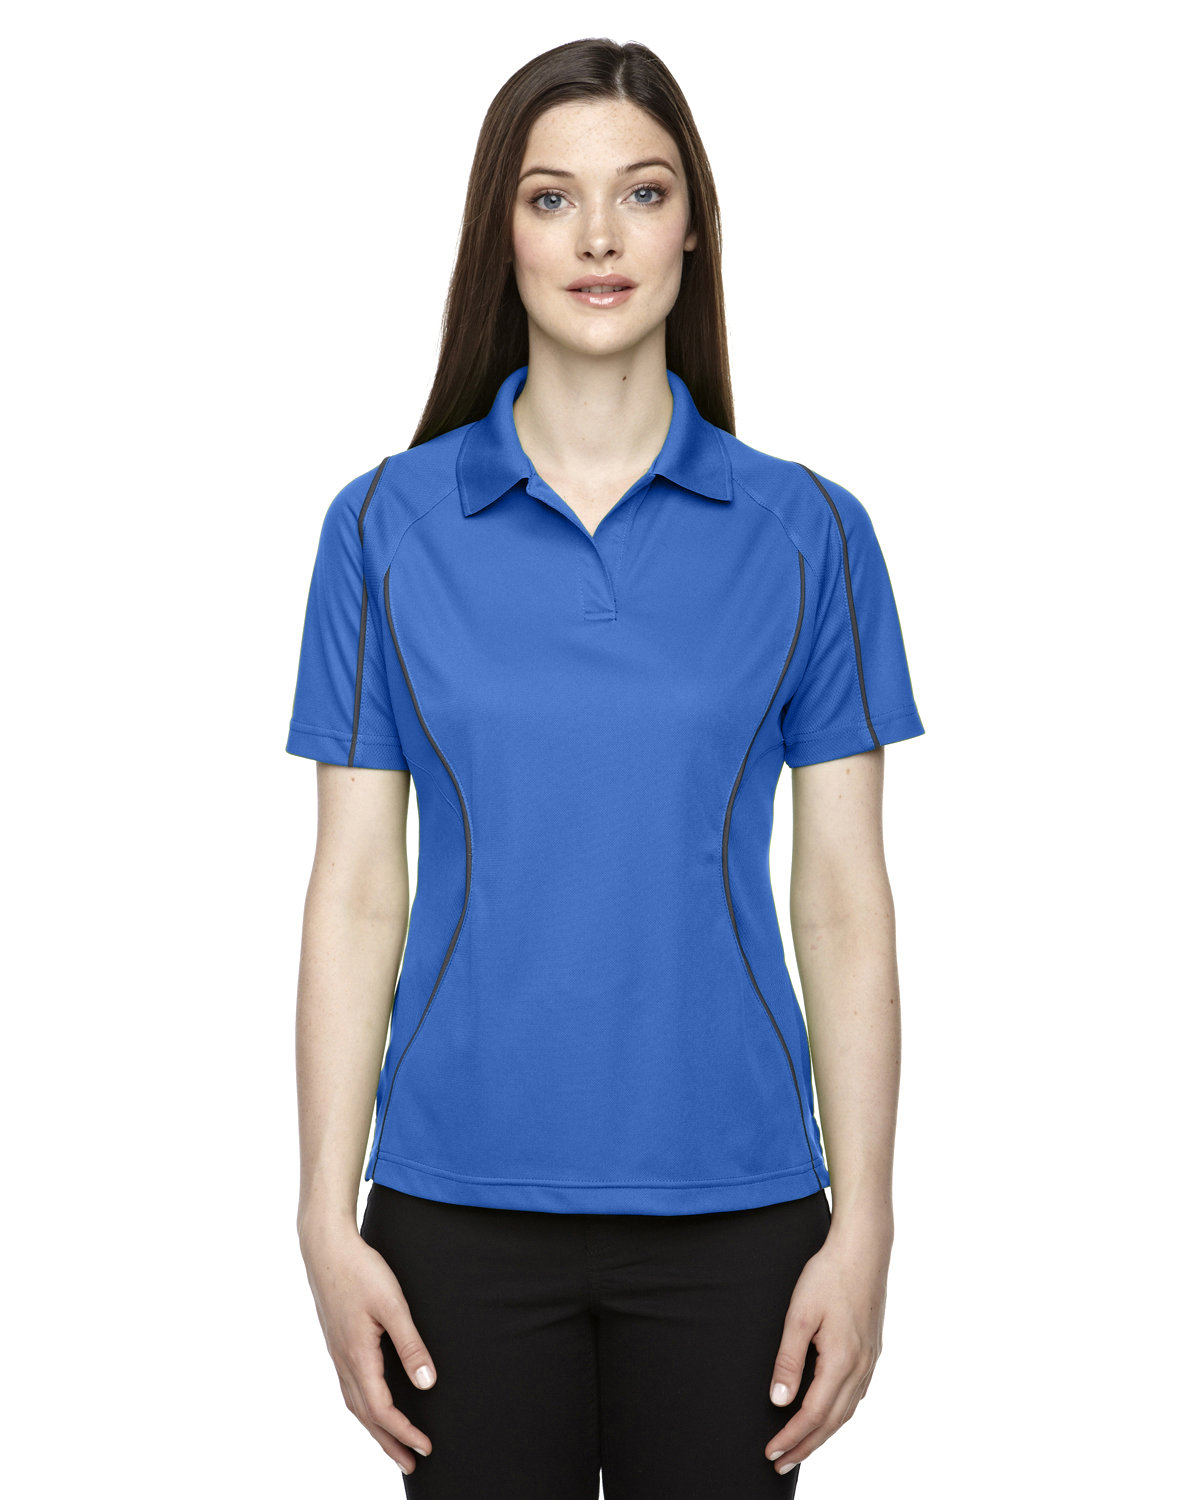 Extreme Ladies' Eperformance™ Velocity Snag Protection Colorblock Polo with Piping LT NAUTICAL BLU 